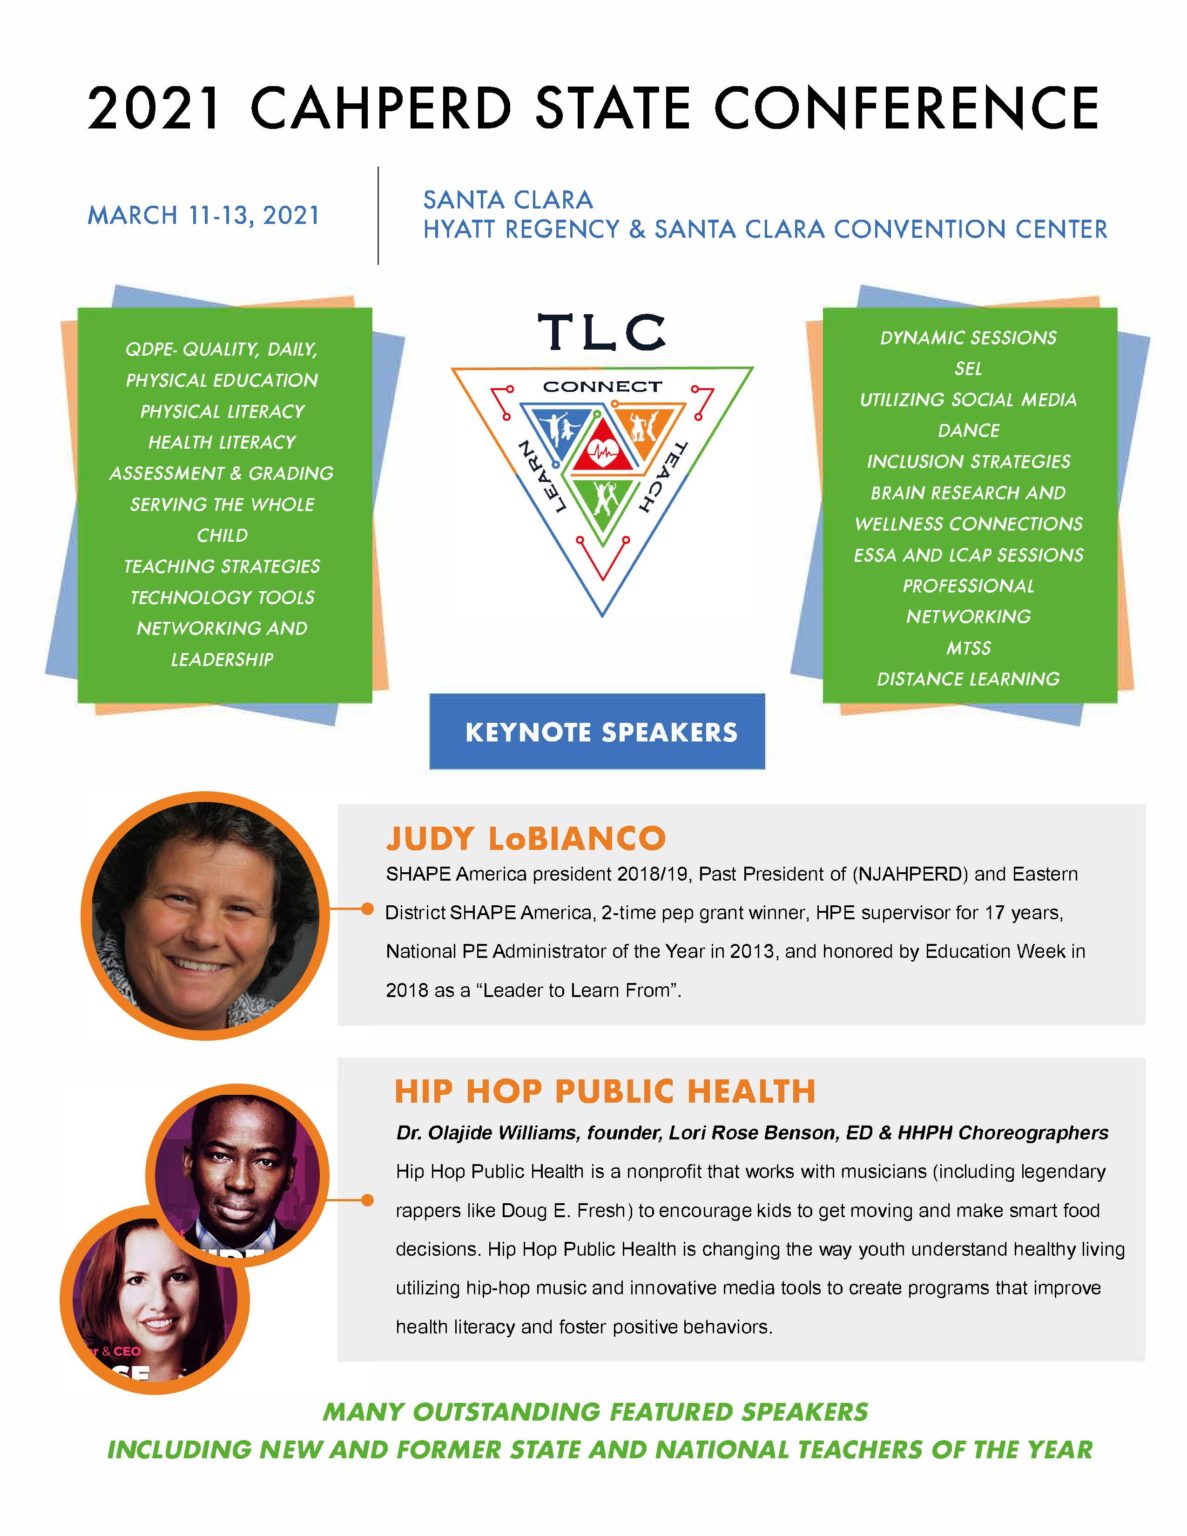 State CAHPERD Conference features ‘Healthy or Harmful Dance’ + HipHop